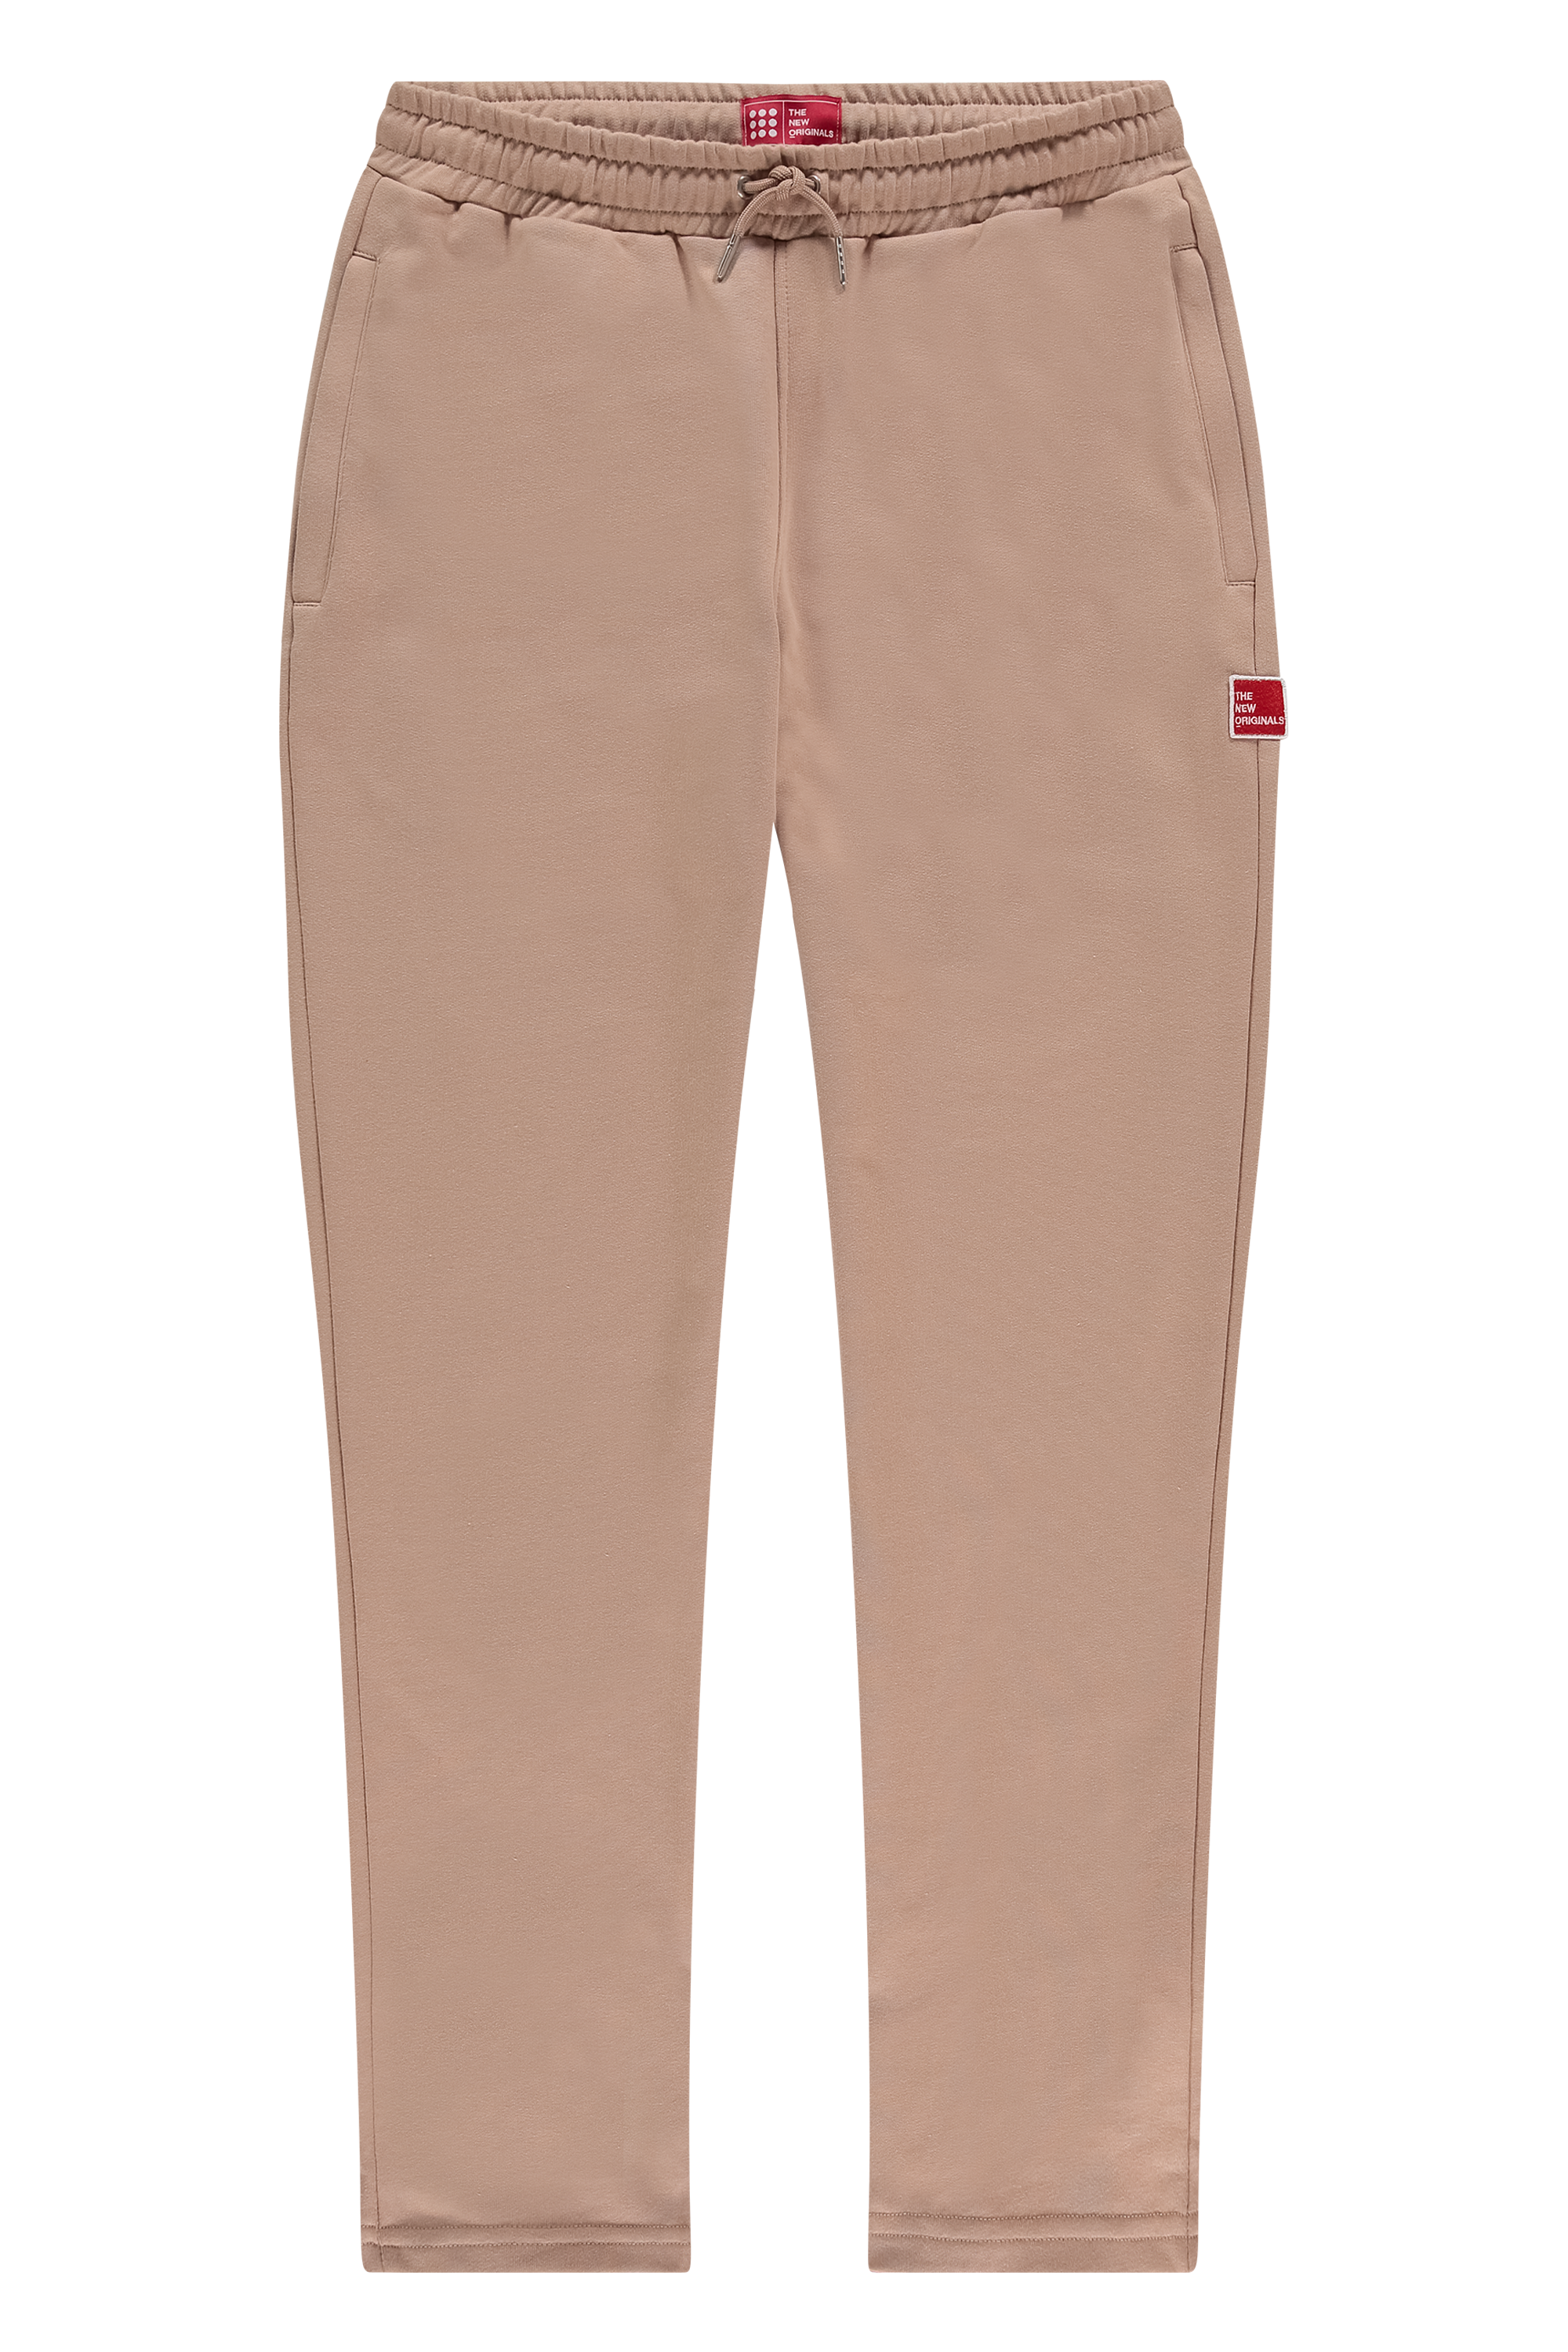 products-testudotrousers_taupe_front-png